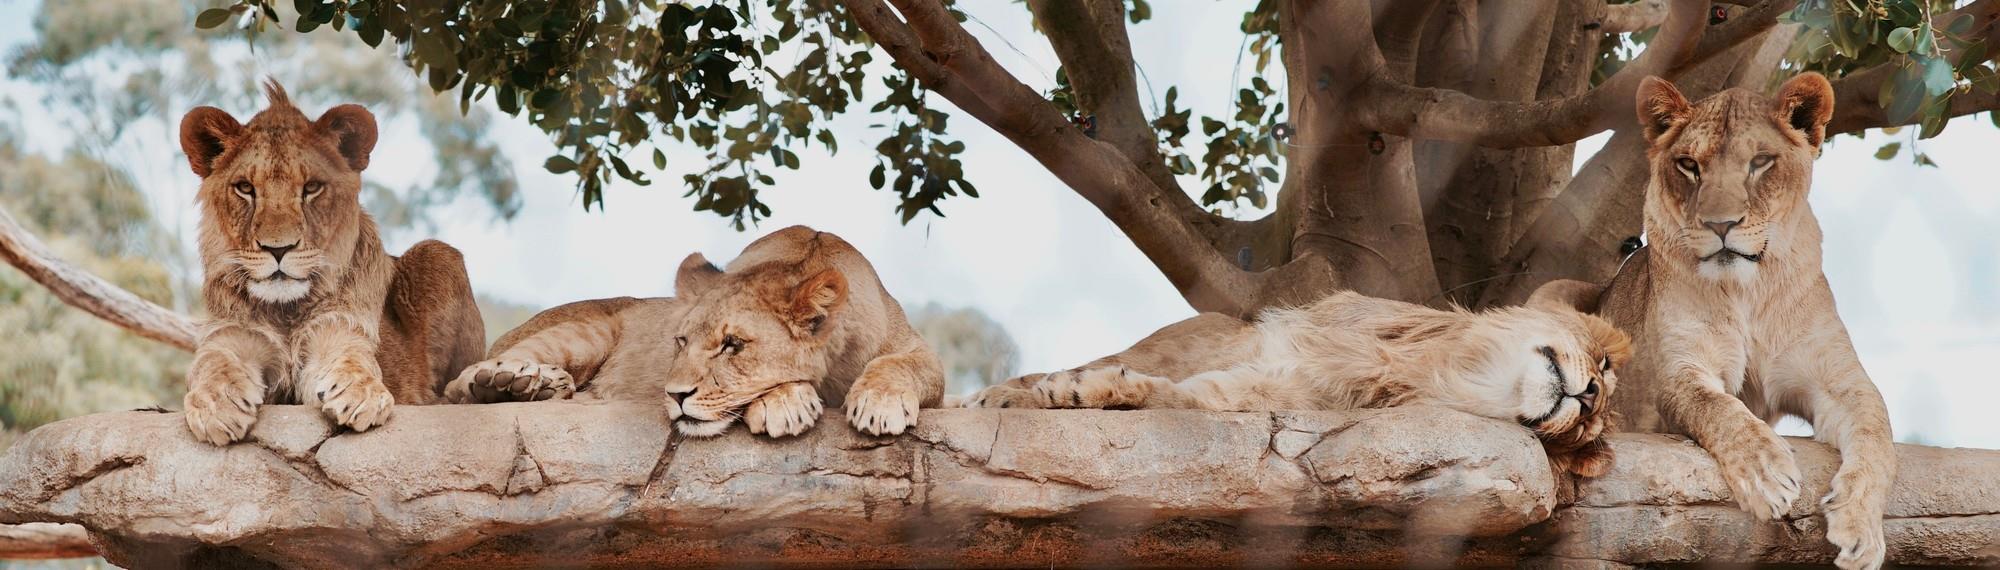 Four Lion siblings relaxing on a rock under the shade of a big tree.